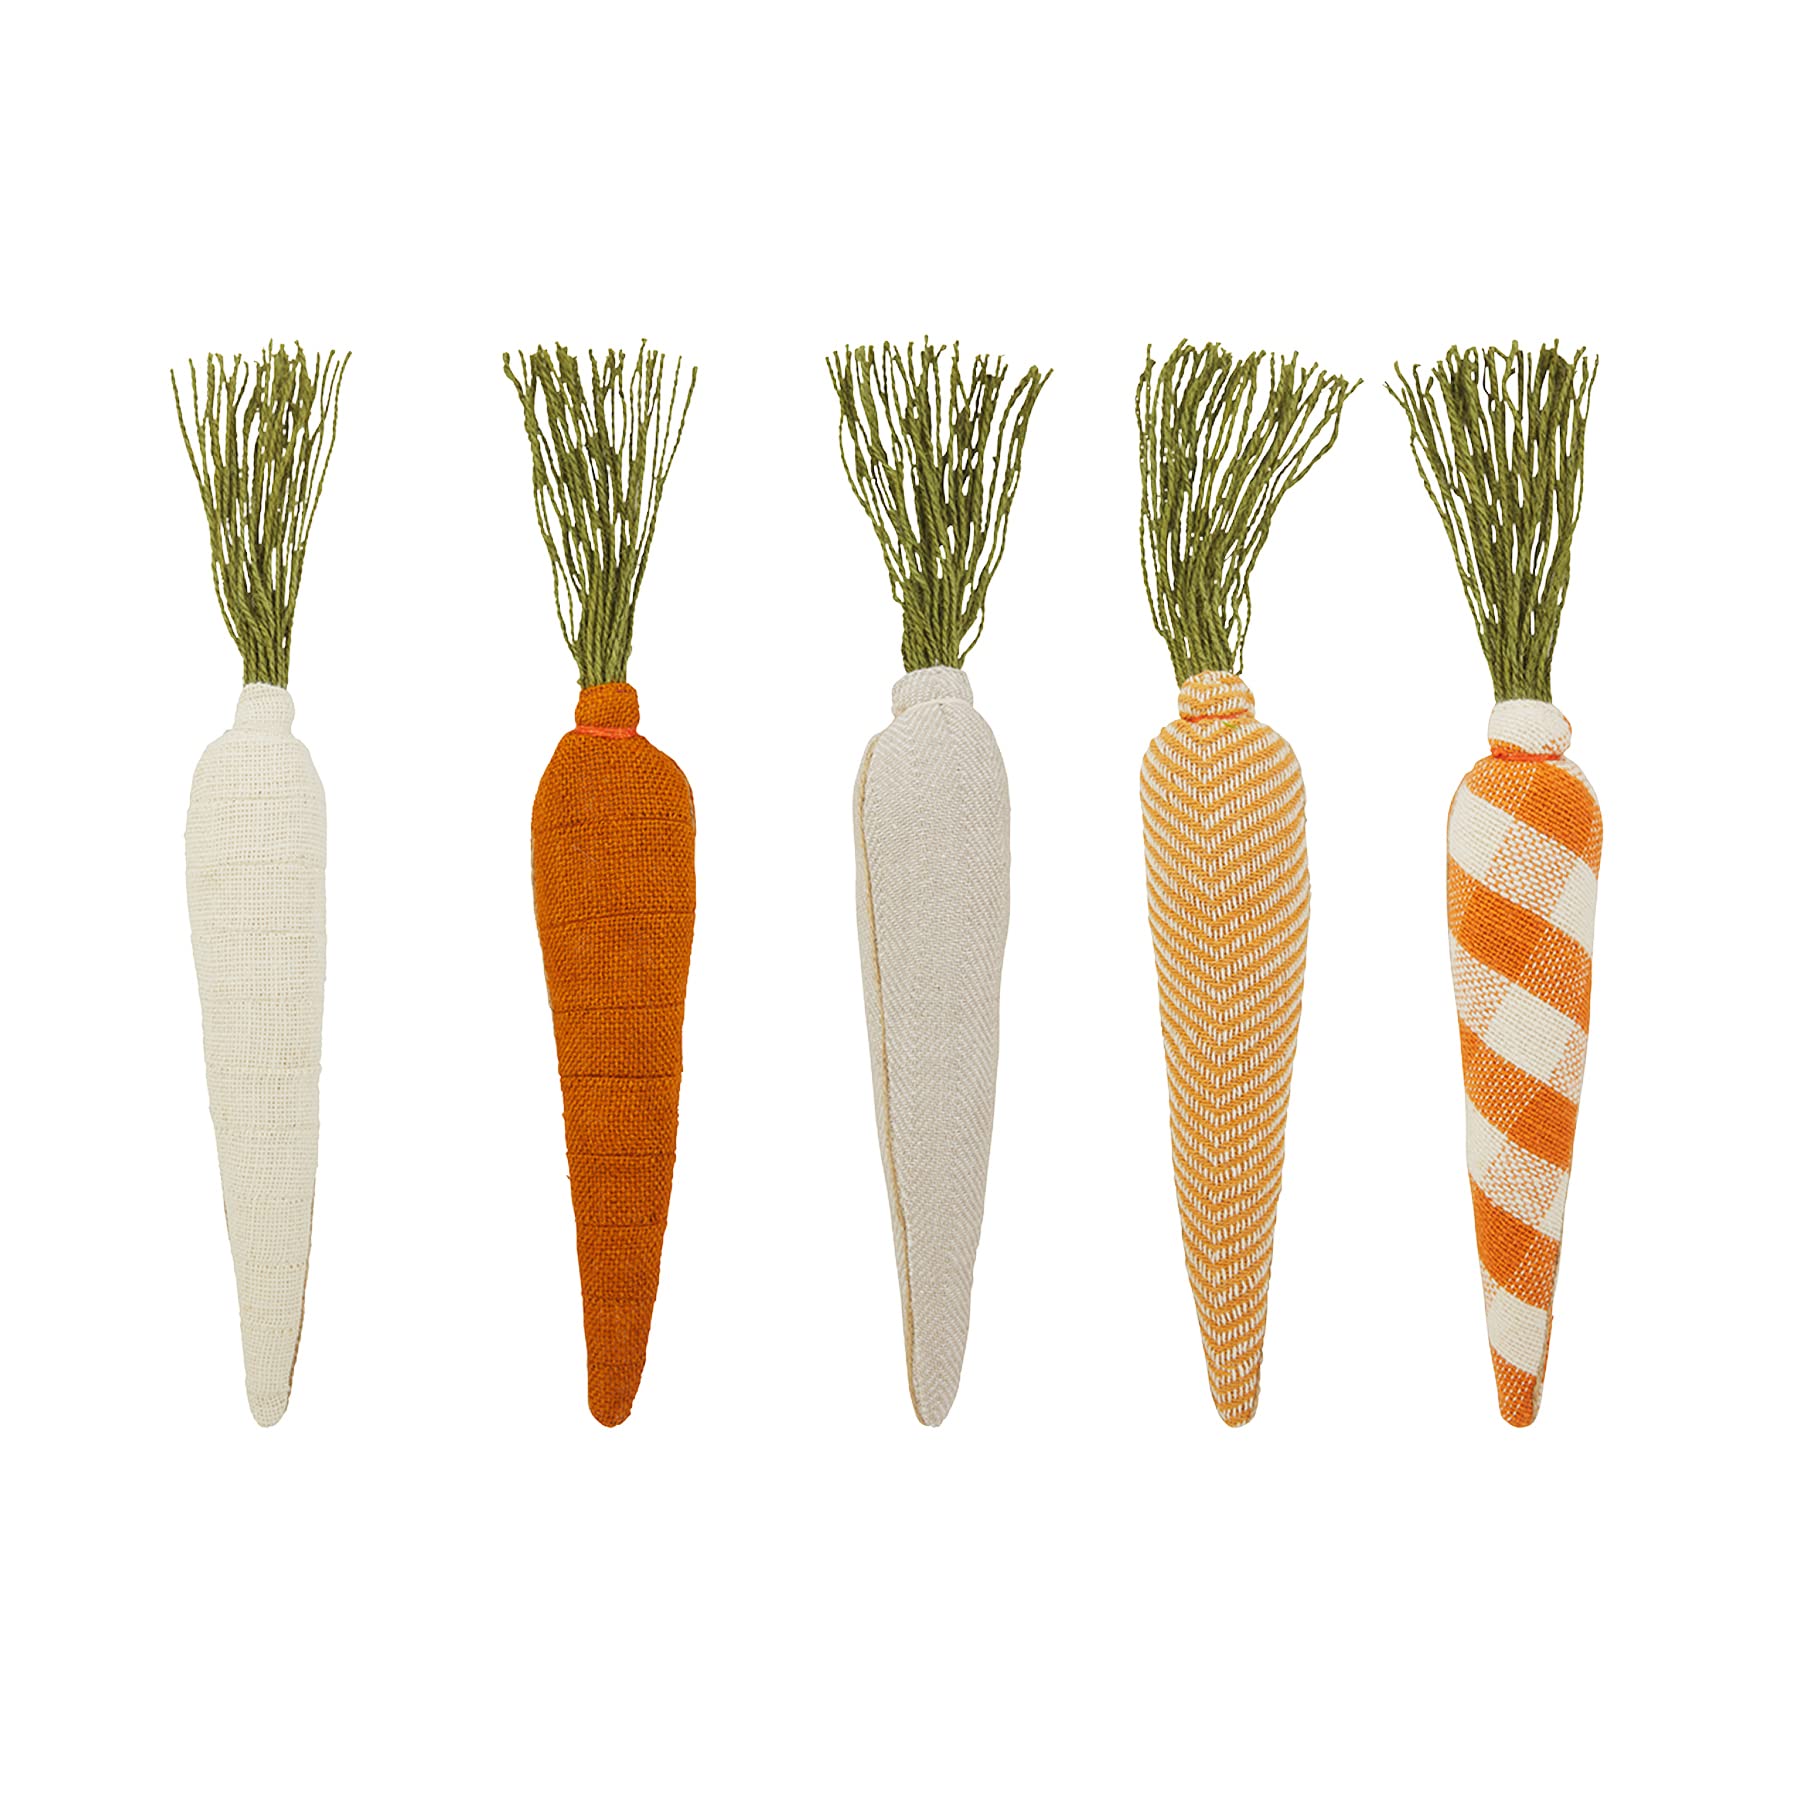 5 assorted fabric carrots.